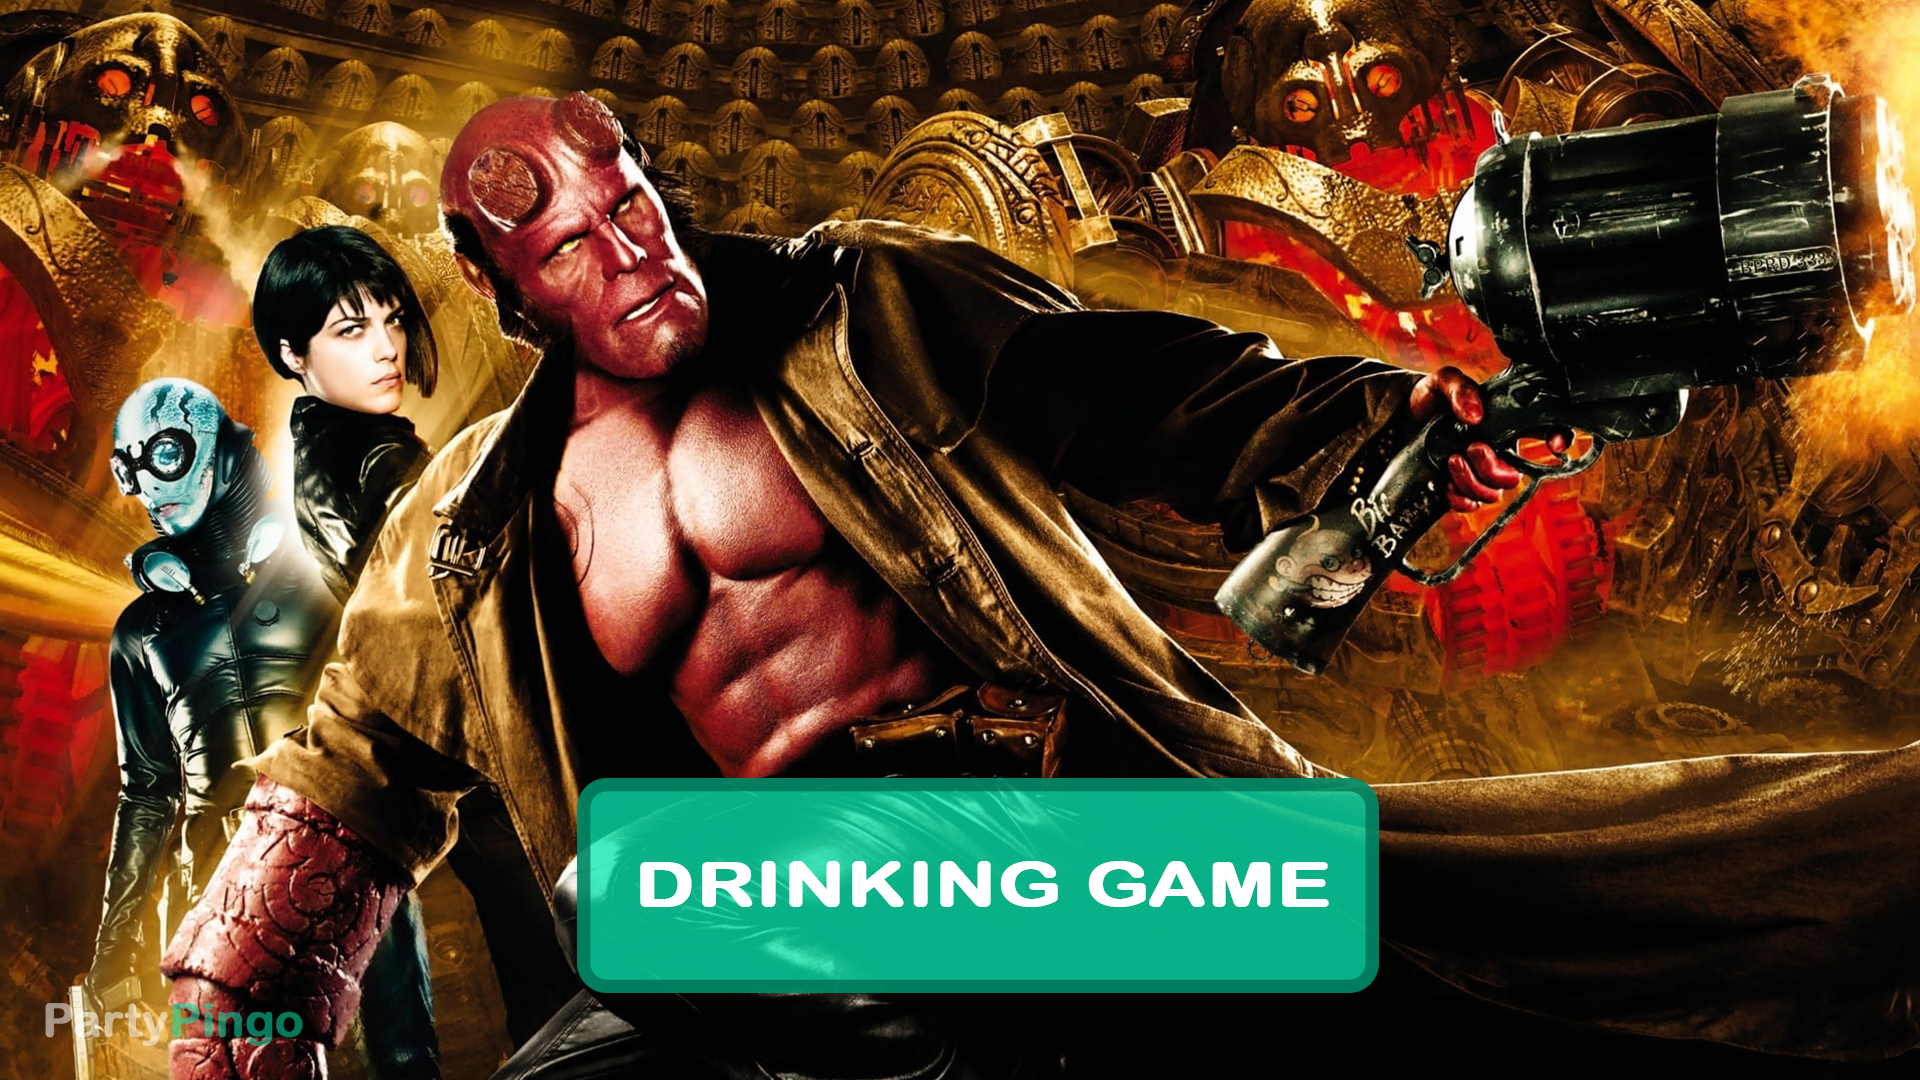 Hellboy 2 - The Golden Army Drinking Game